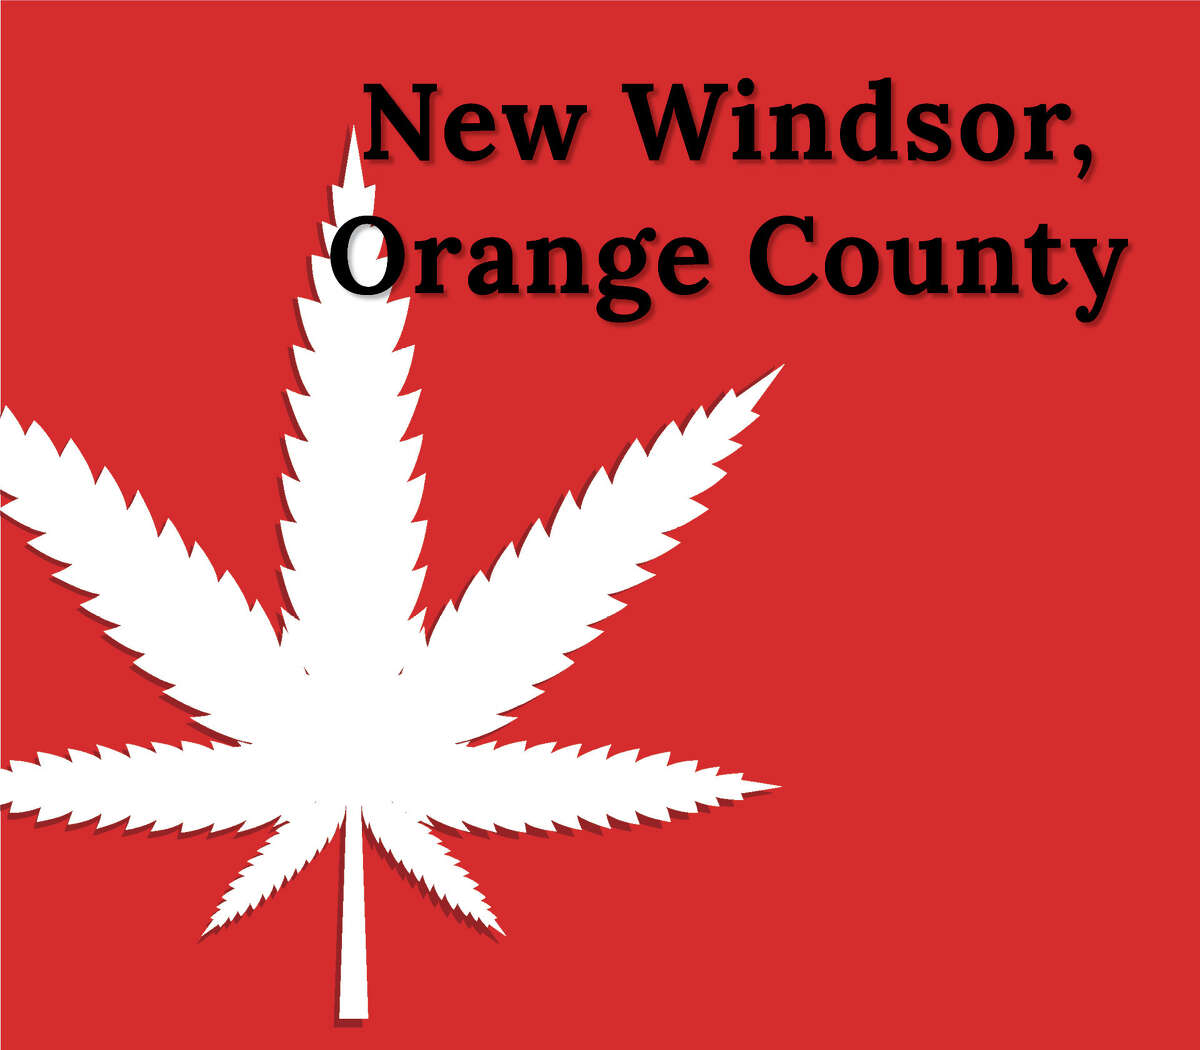 The Town of New Windsor voted to opt out at its Sept. 1 board meeting. George Meyers, supervisor of the Town of New Windsor, said he wasn't eager to have cannabis dispensaries or businesses for on-site consumption. "I just was not crazy about something that is new," he said. "There are a lot of other municipalities who are going to try it, and I'll keep an eye on them and see what's what."